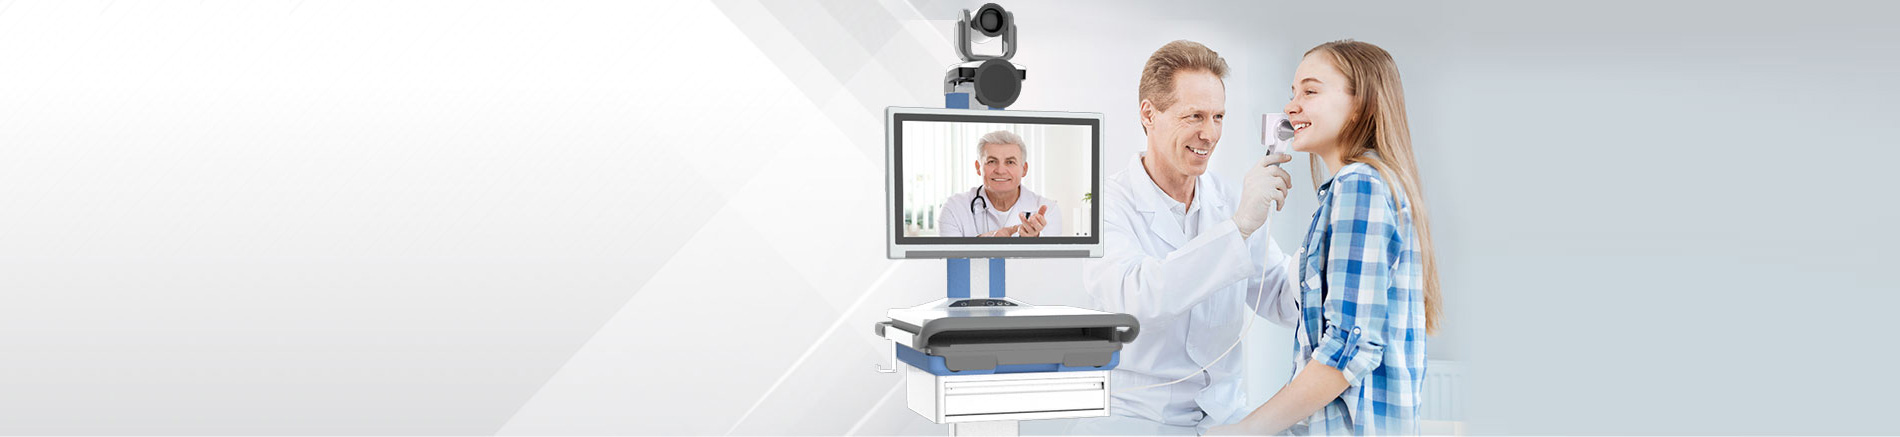 Telemedicine Cart Solution with Video Conferencing Software for Easy Deployment